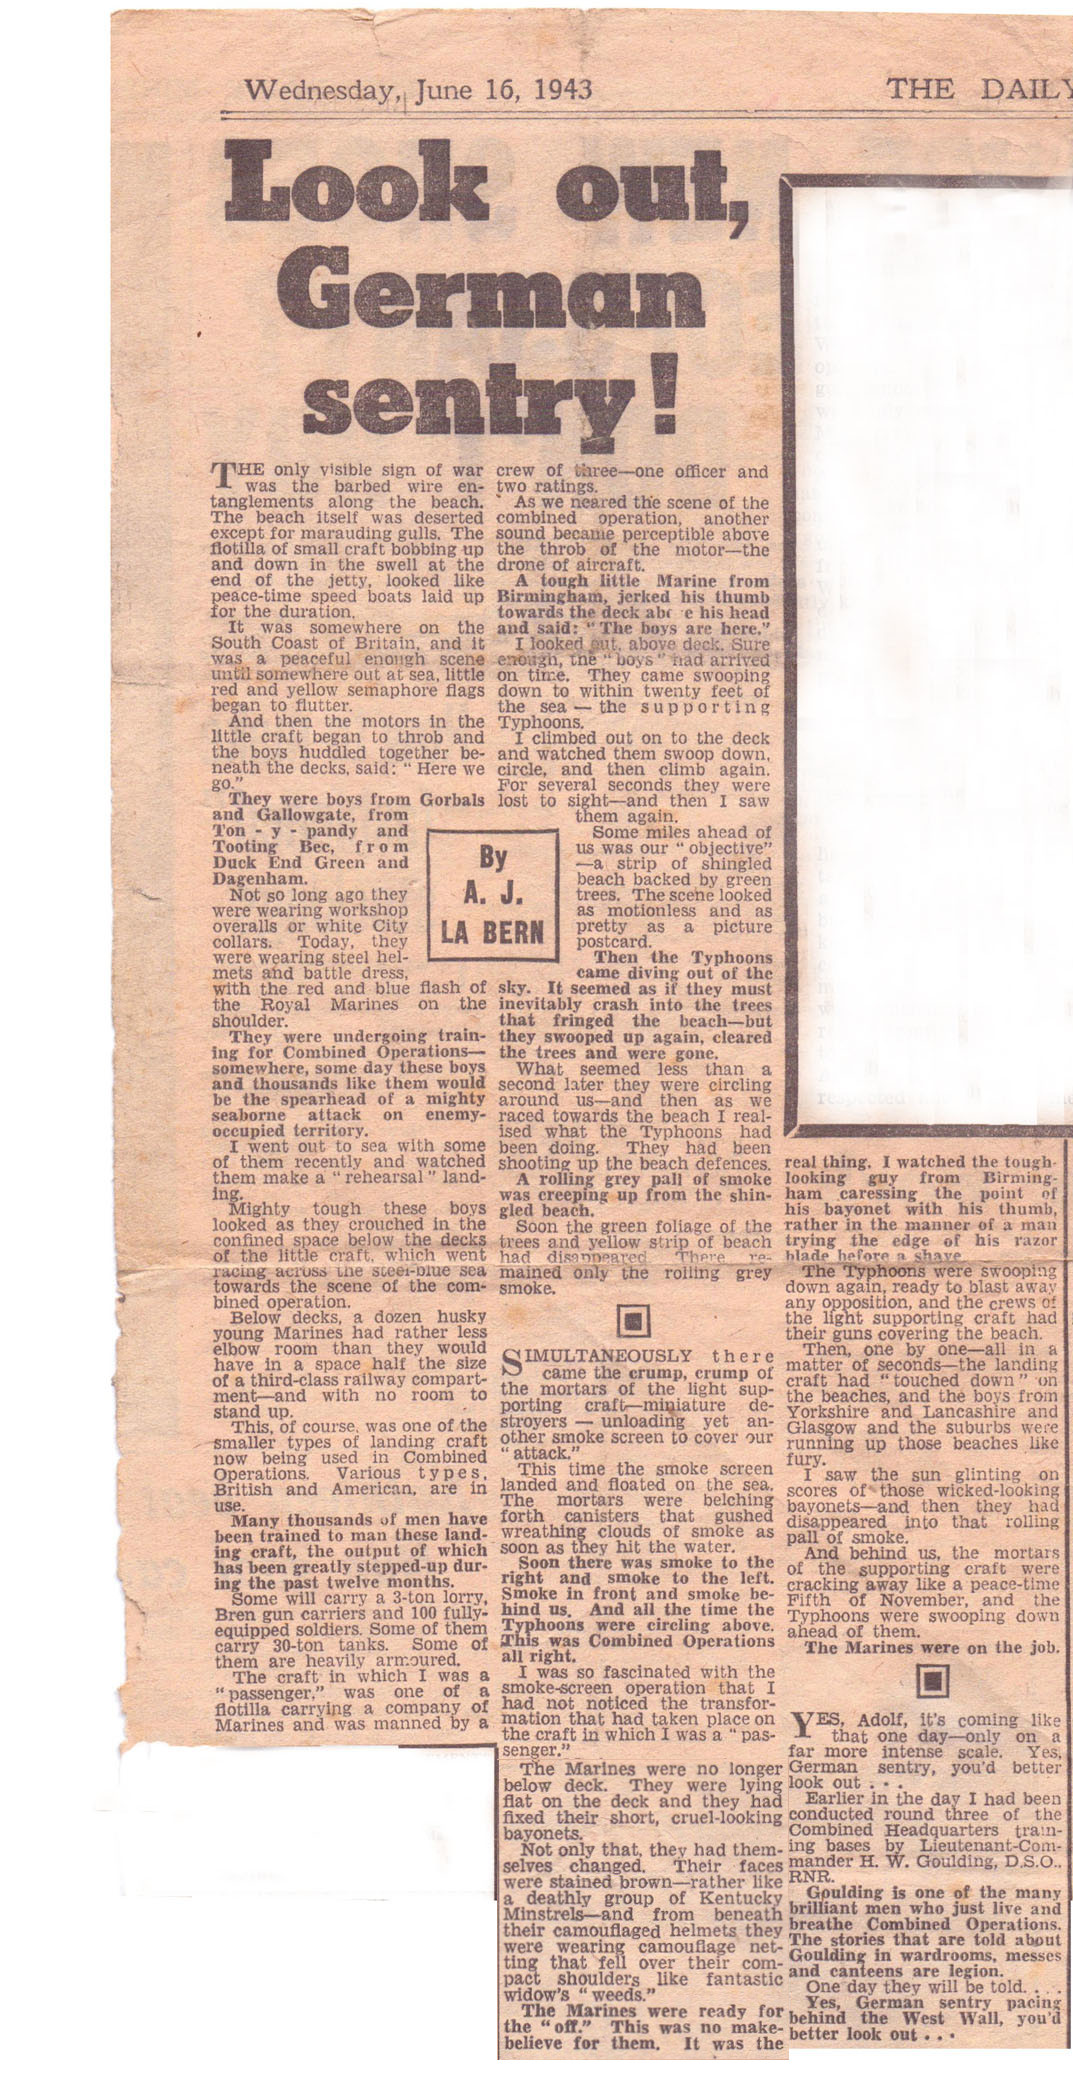 Newspaper article titled "Lookout German sentry" dated June 16th 1943